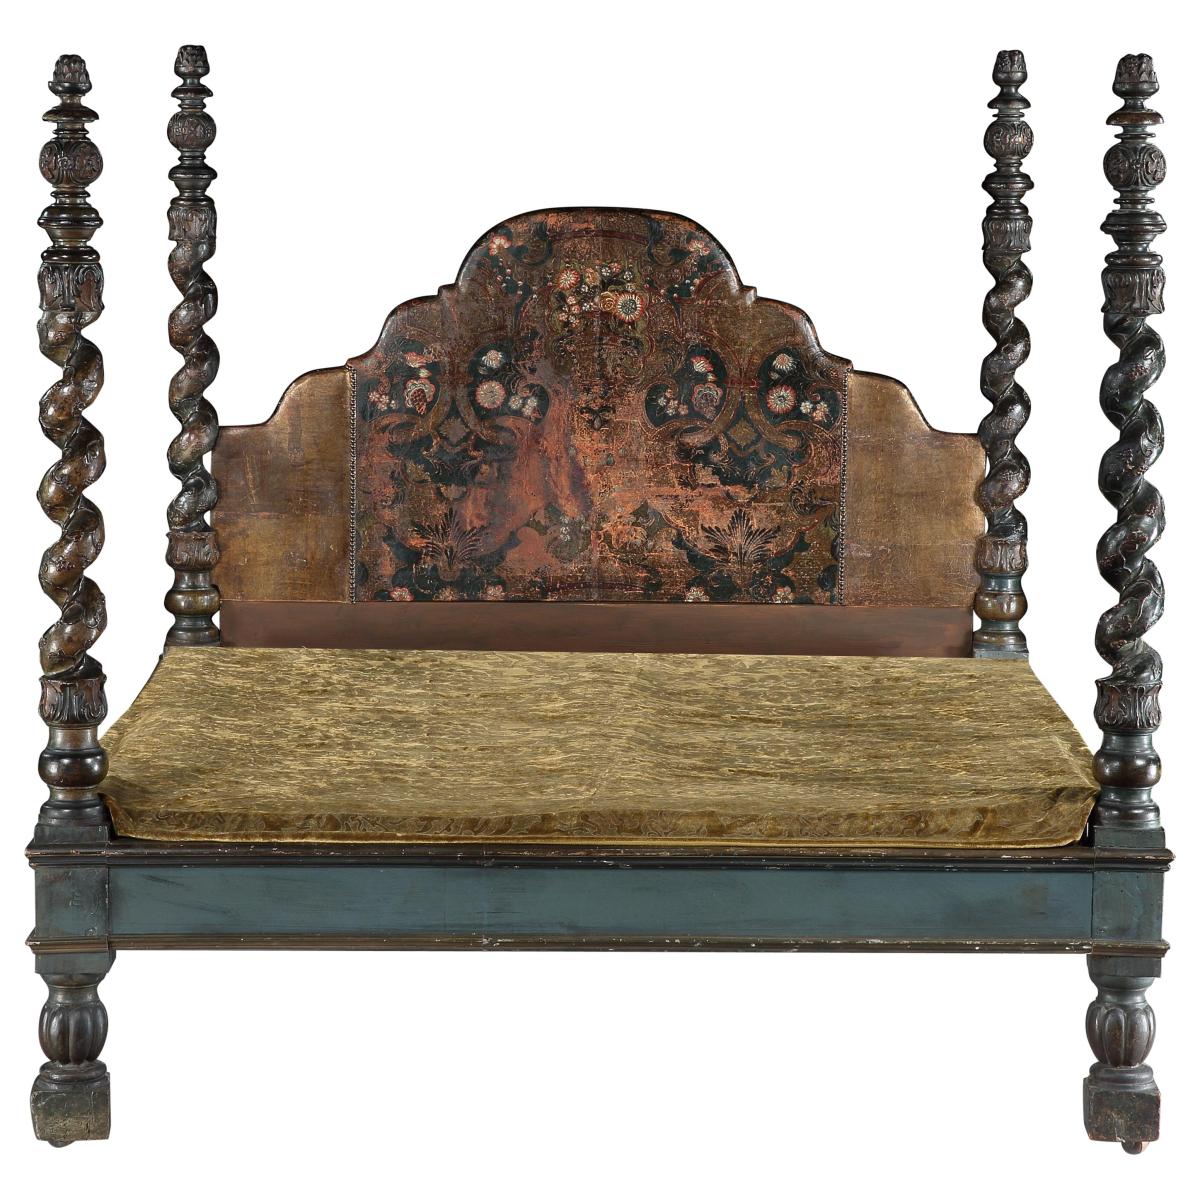 Early 18th Century Spanish Demi-Tester Bed